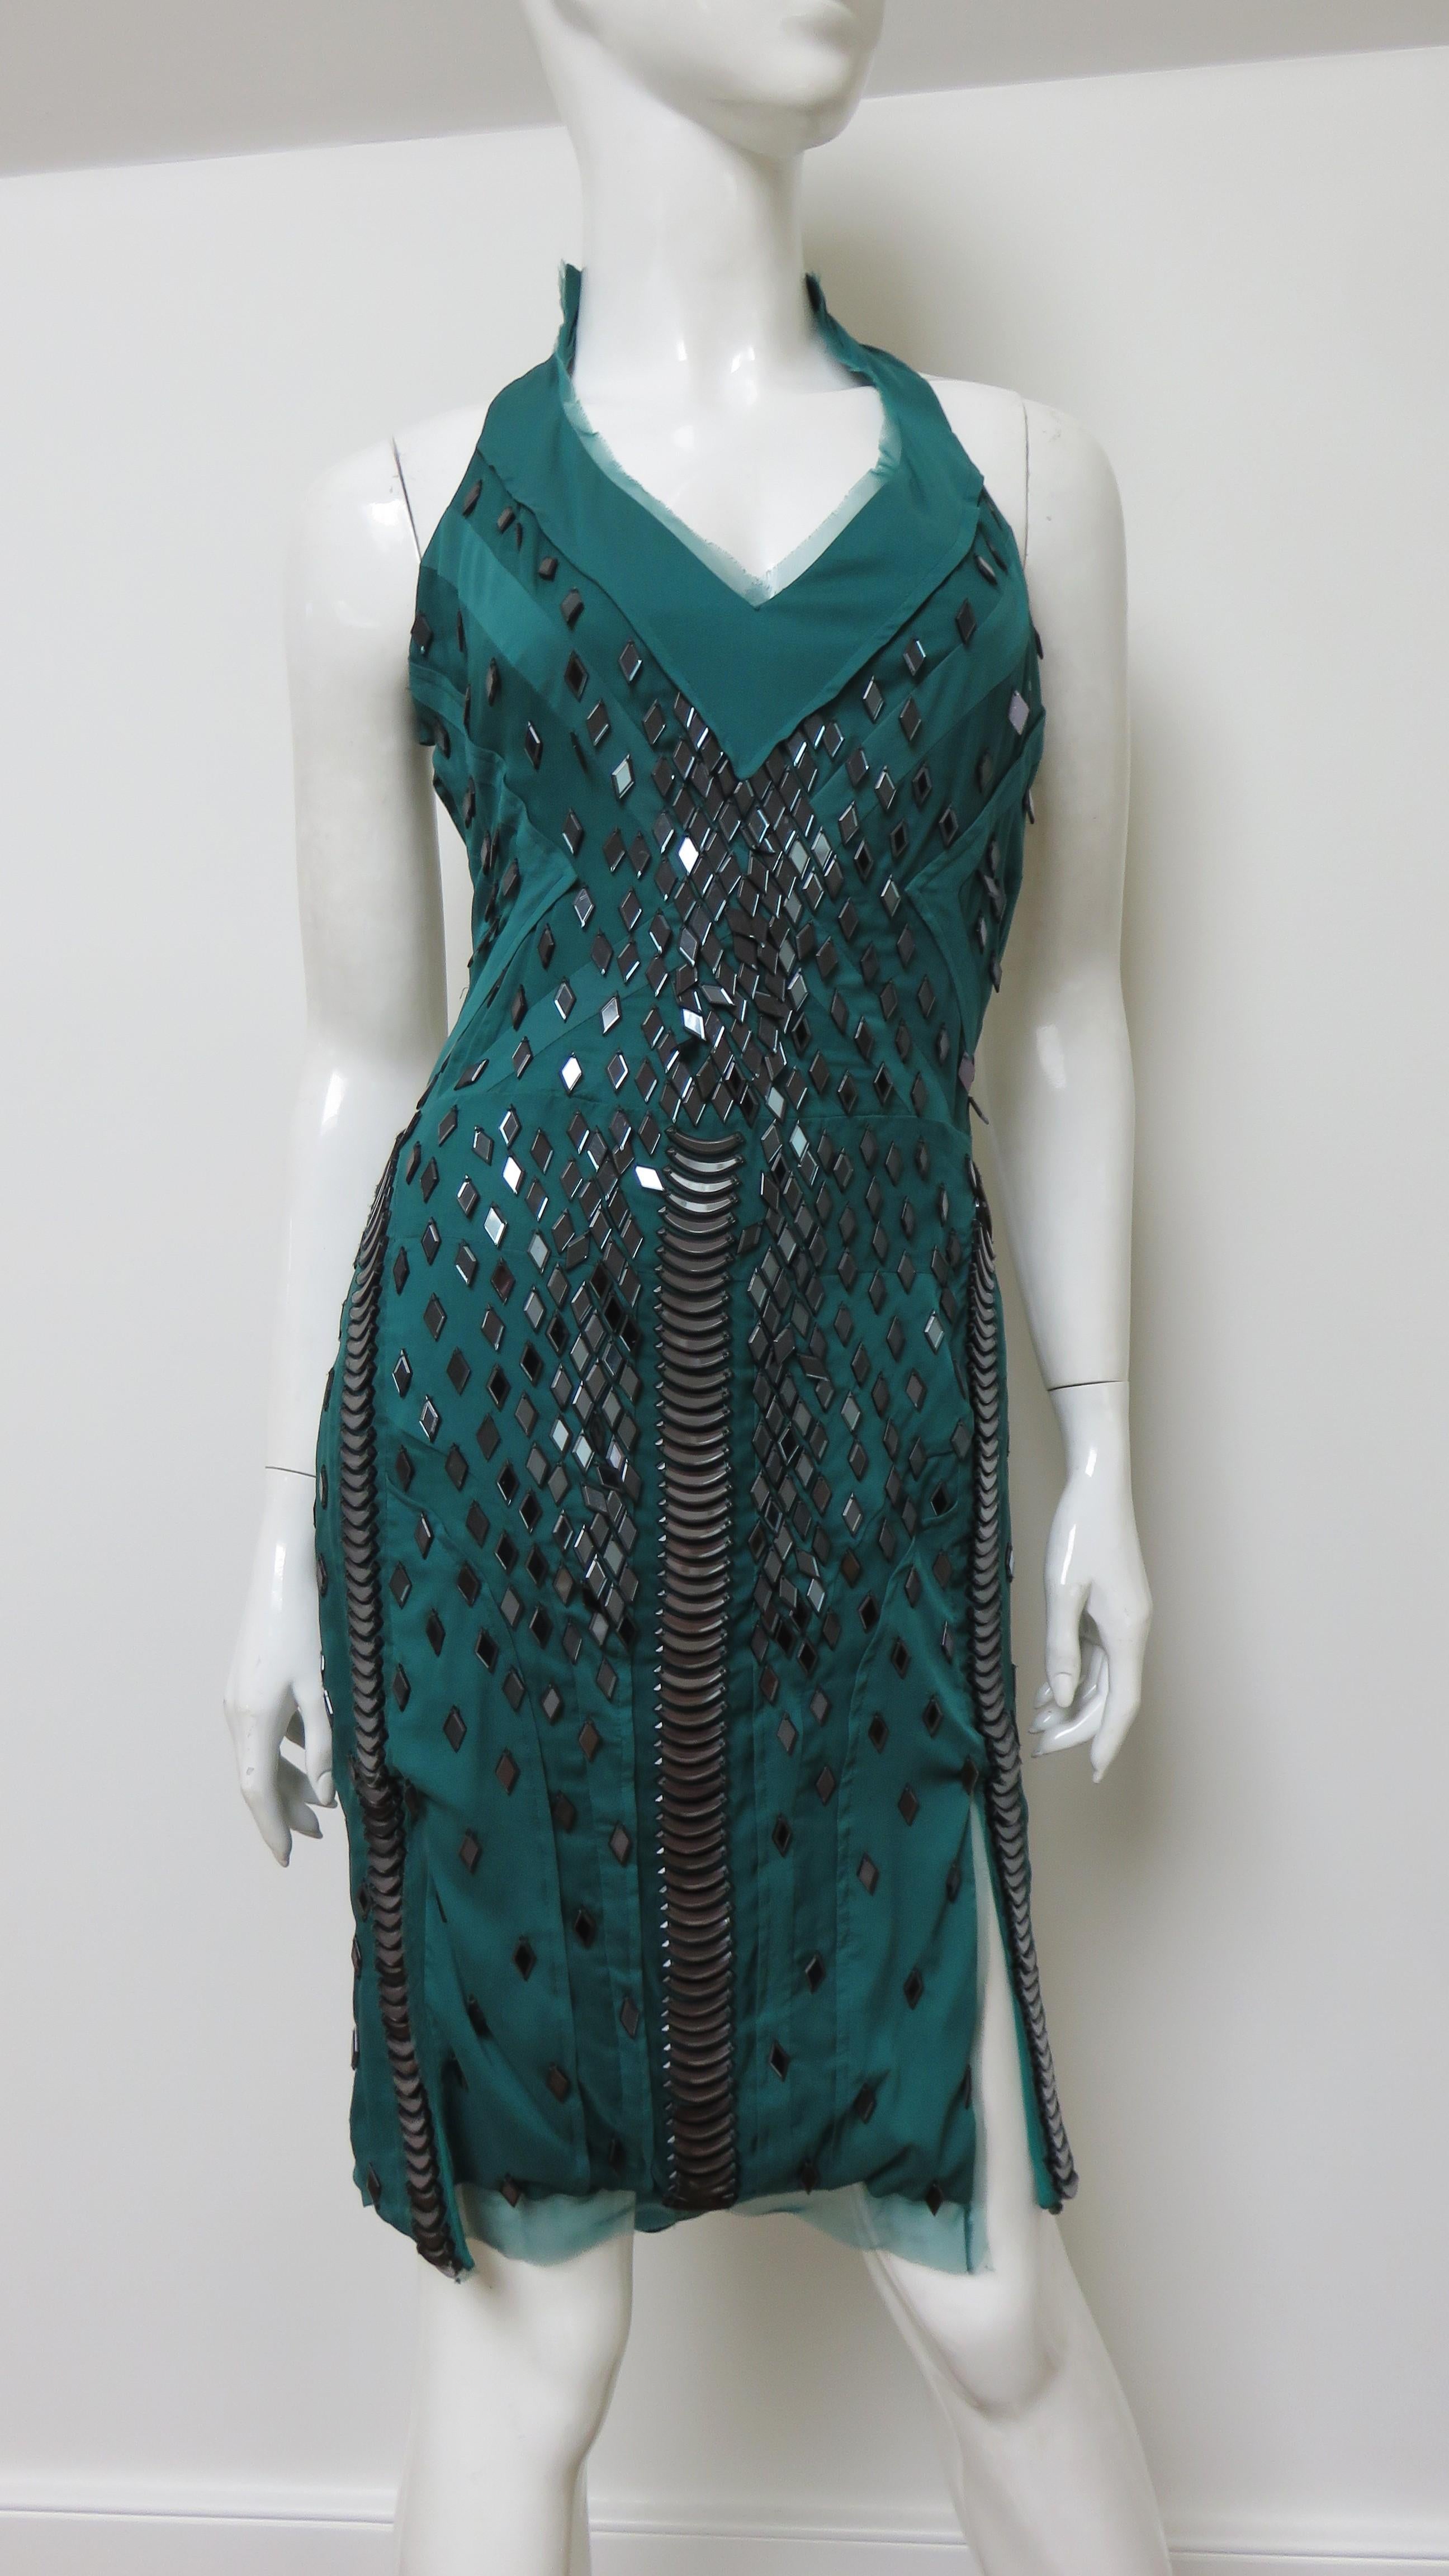 A gorgeous deep emerald green silk dress with elaborate appliques by Gucci.  It has a V neckline with cut in shoulders and a large back cut out with 2 matching straps across it. The dress is semi fitted with elaborate seaming and an abundance of